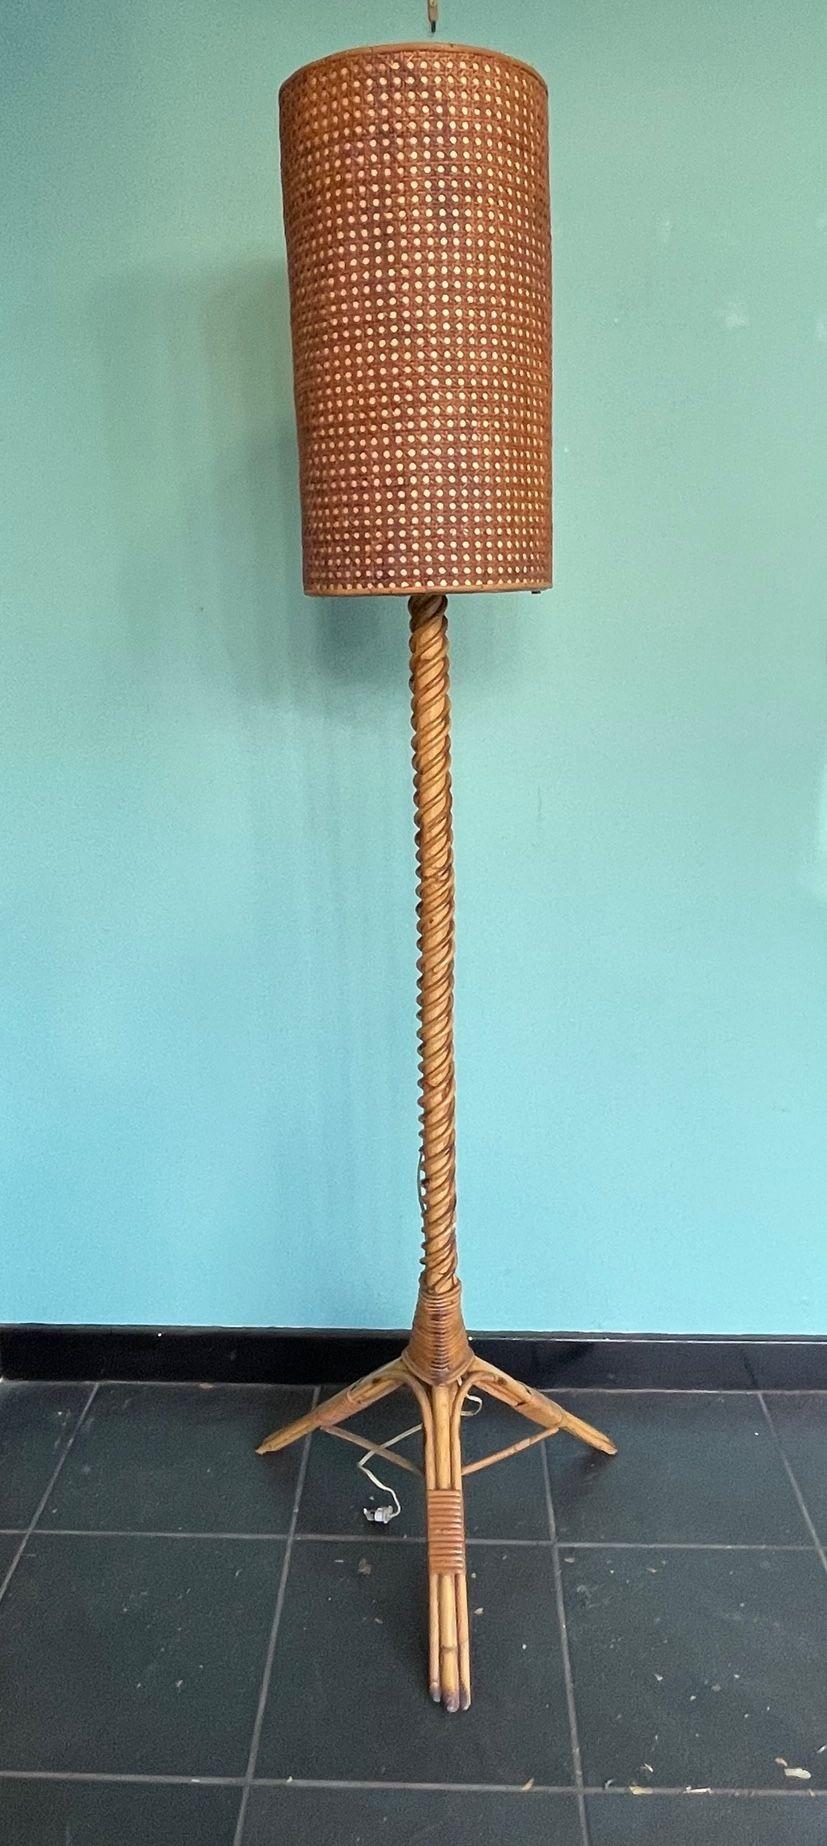 A wonderful French 1960s bamboo floor lamp by Louis Sognot with coiled bamboo stem and original rattan and parchment shade. Re wired with antique cord flex and PAT tested